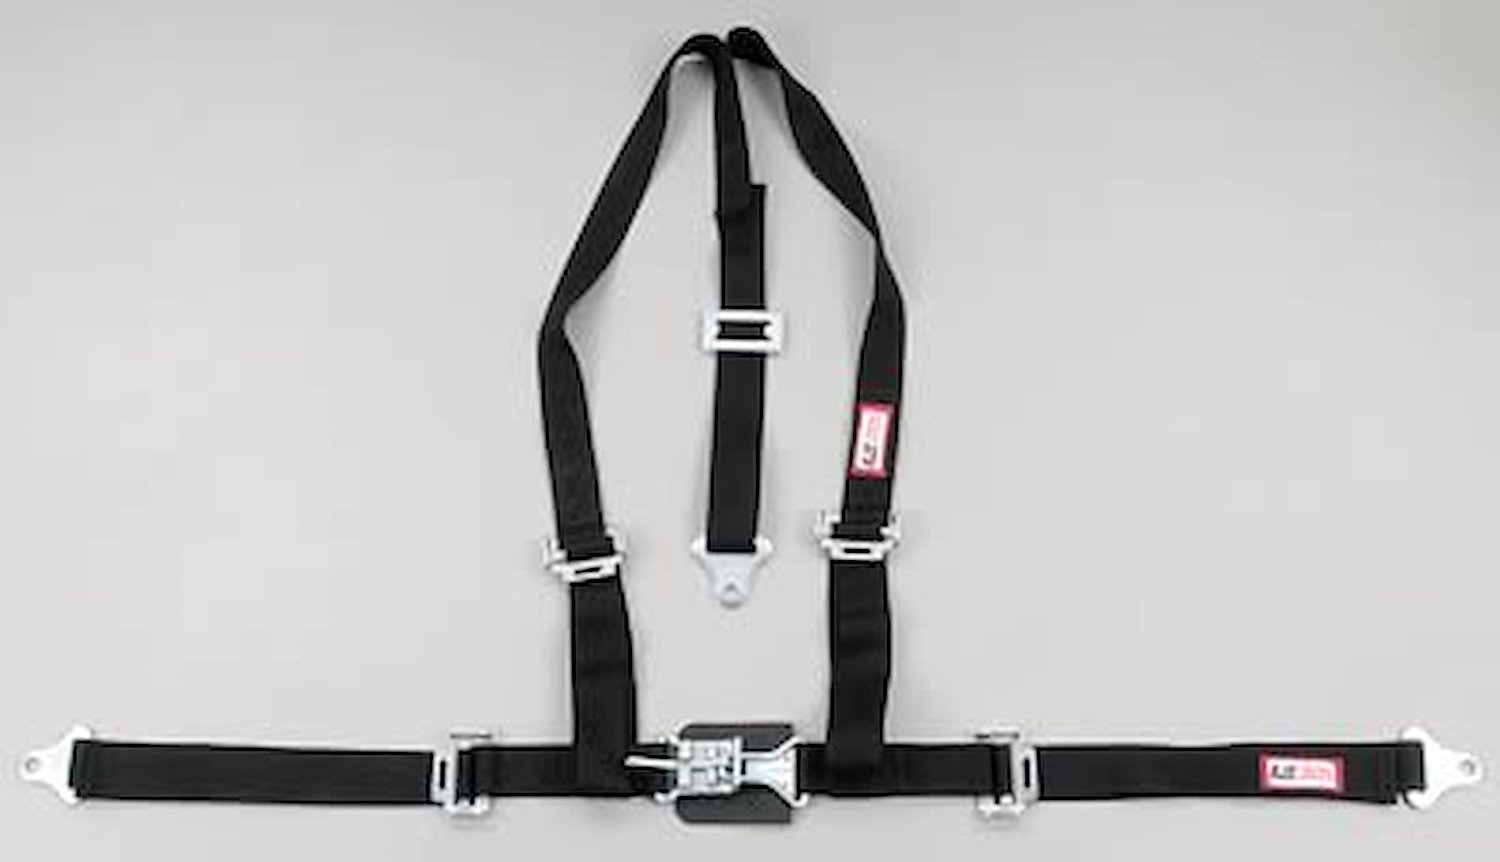 NON-SFI L&L HARNESS 3 PULL DOWN Lap Belt SEWN IN 2 S.H. Individual FLOOR Mount ALL WRAP ENDS HOT PINK